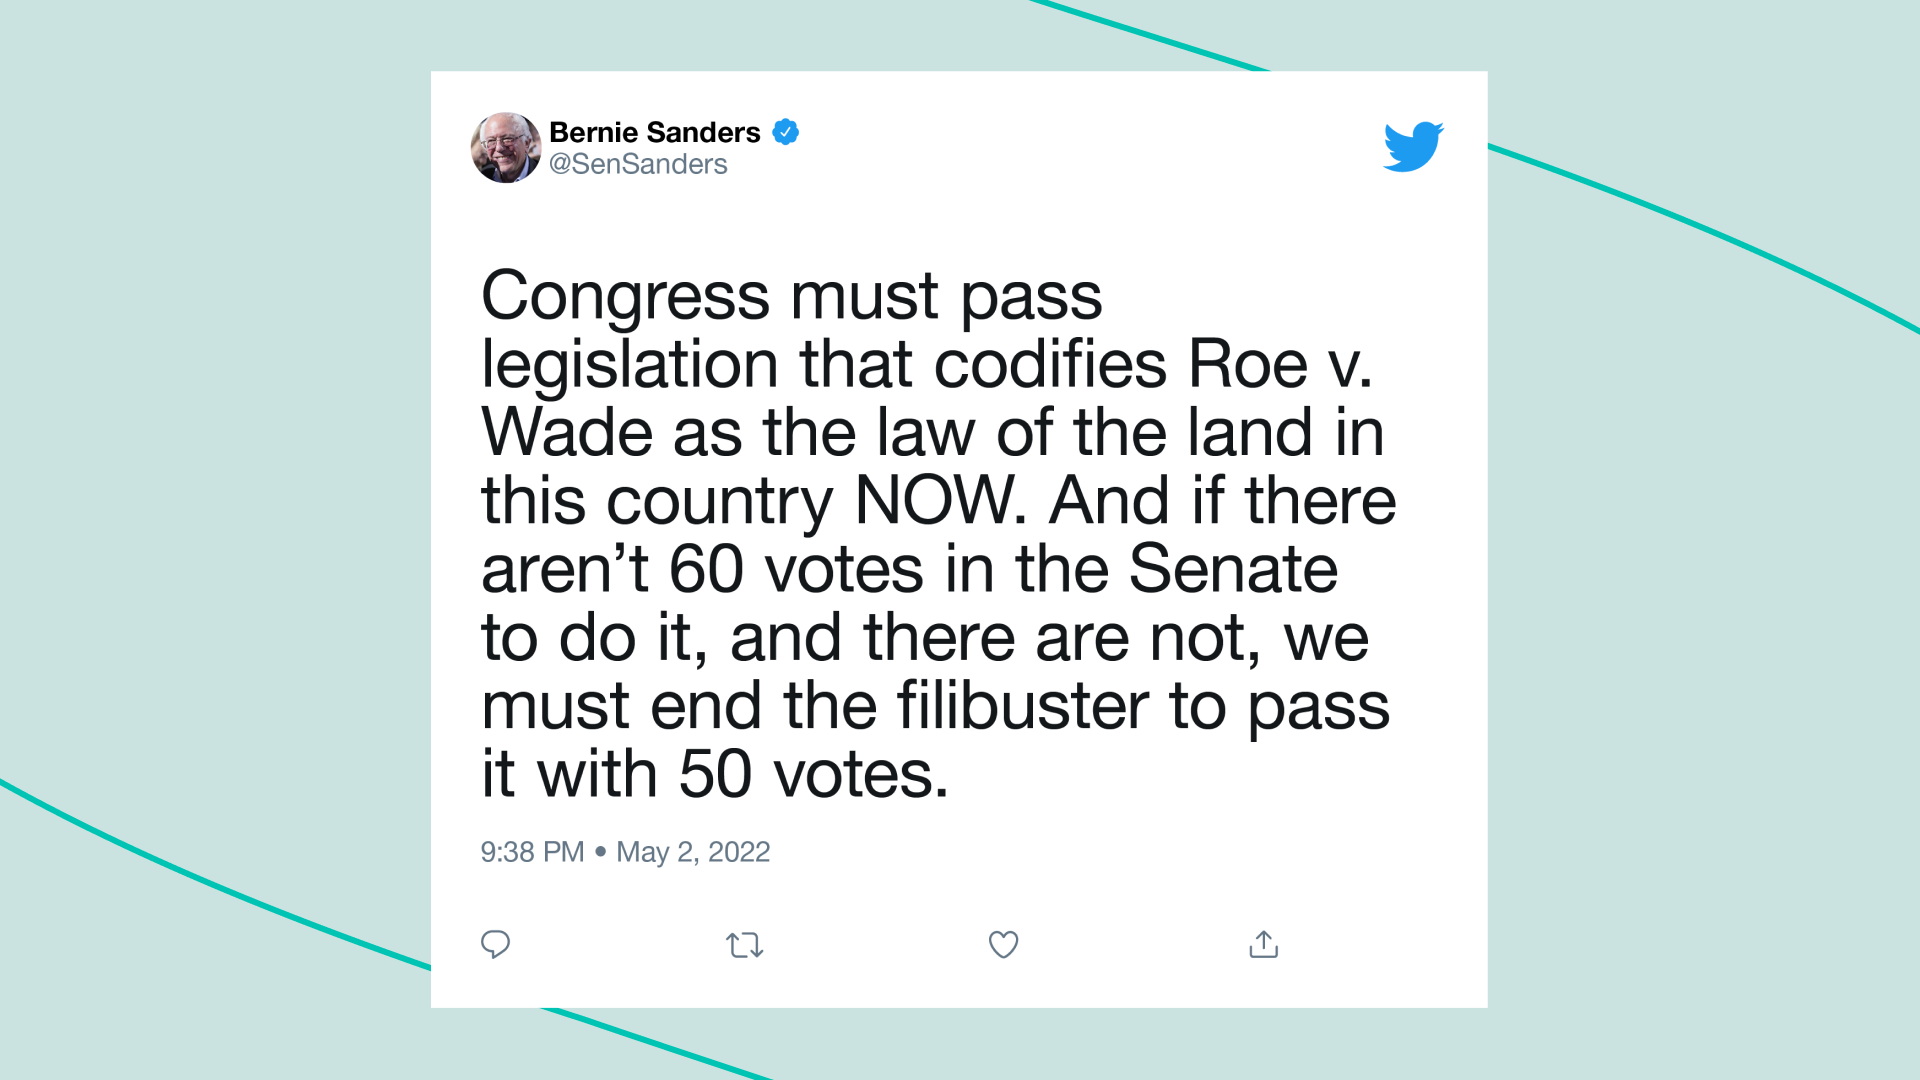 Congress must pass legislation that codifies Roe v. Wade as the law of the land in this country now. And if there aren't 60 votes in the Senate to do it, and there are not, we must end the filibuster to pass it with 50 votes.